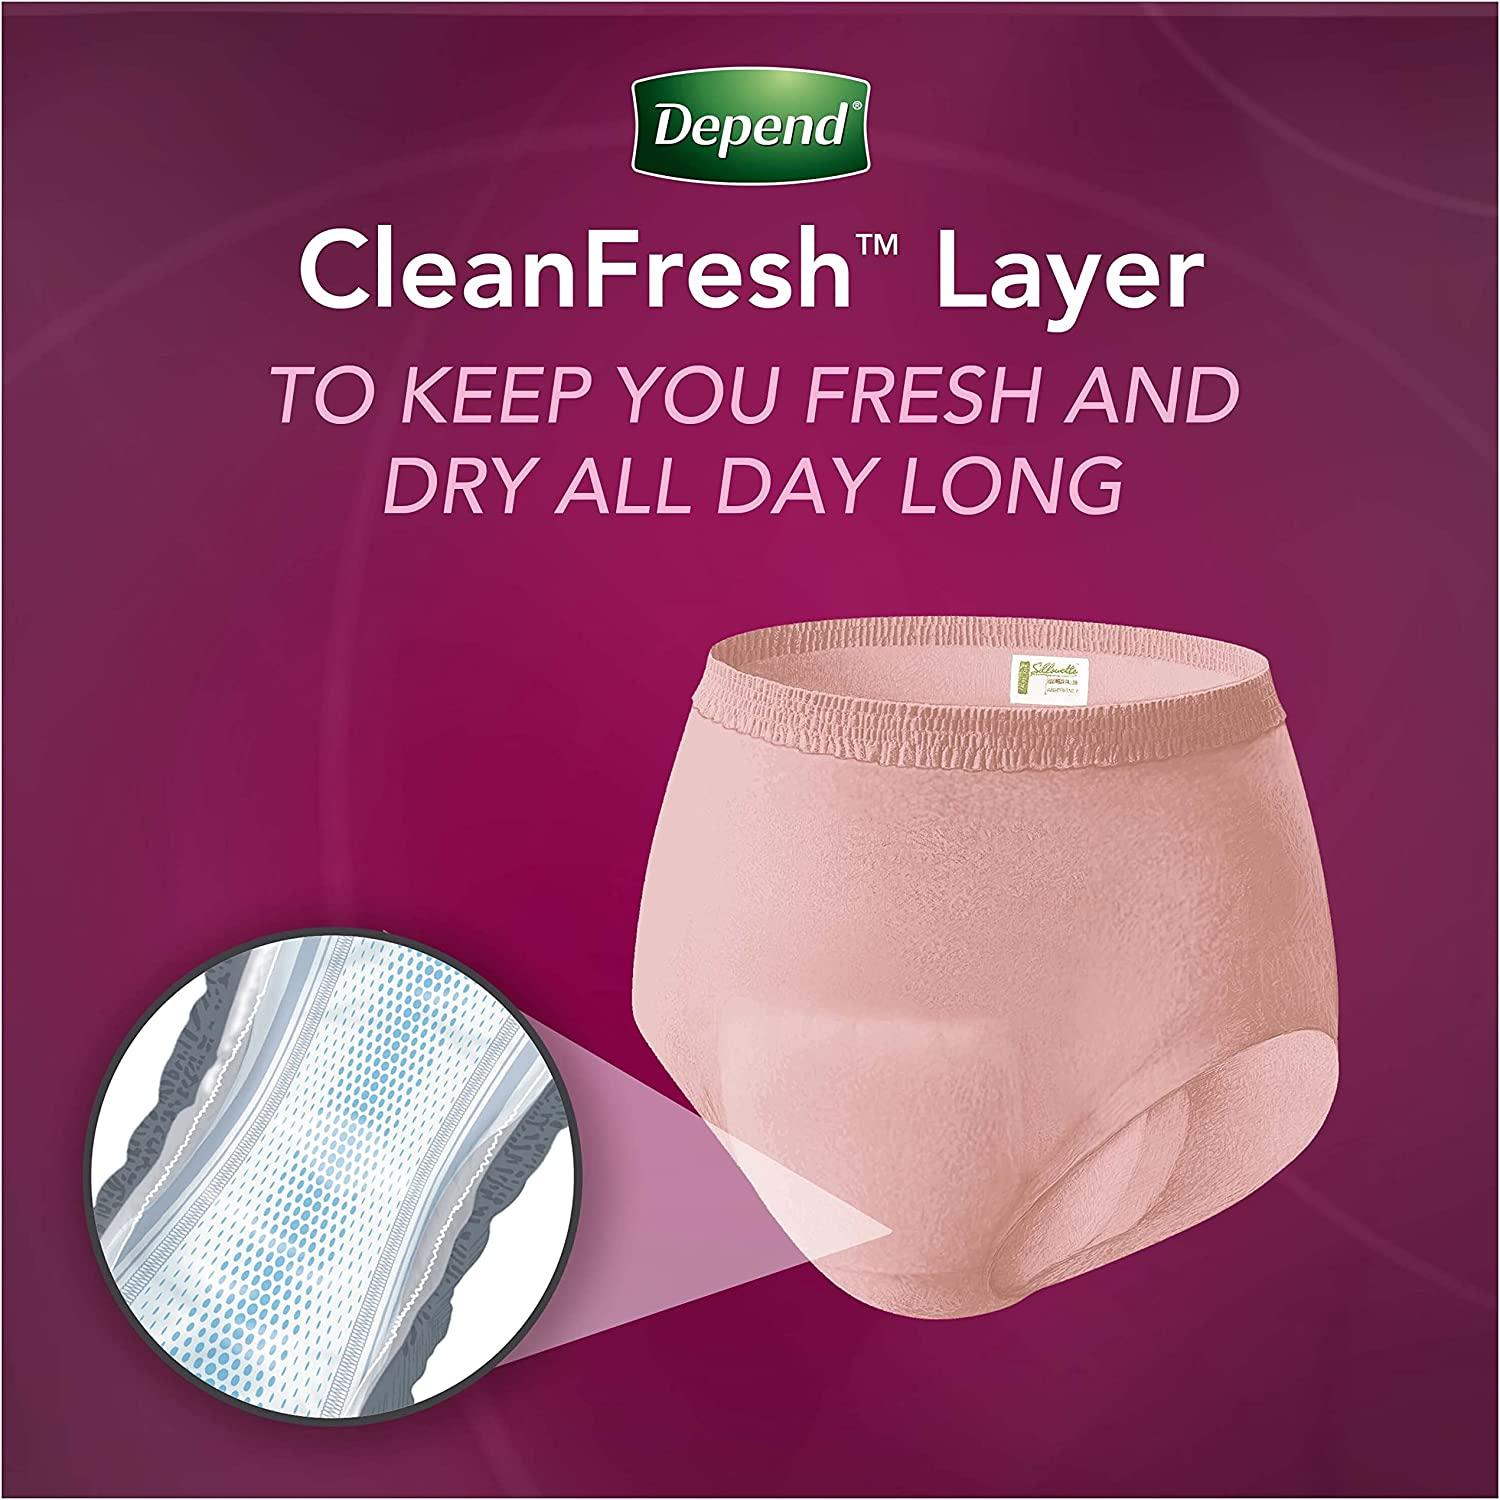 Depend Silhouette Incontinence Briefs For Women - Maximum Absorbency